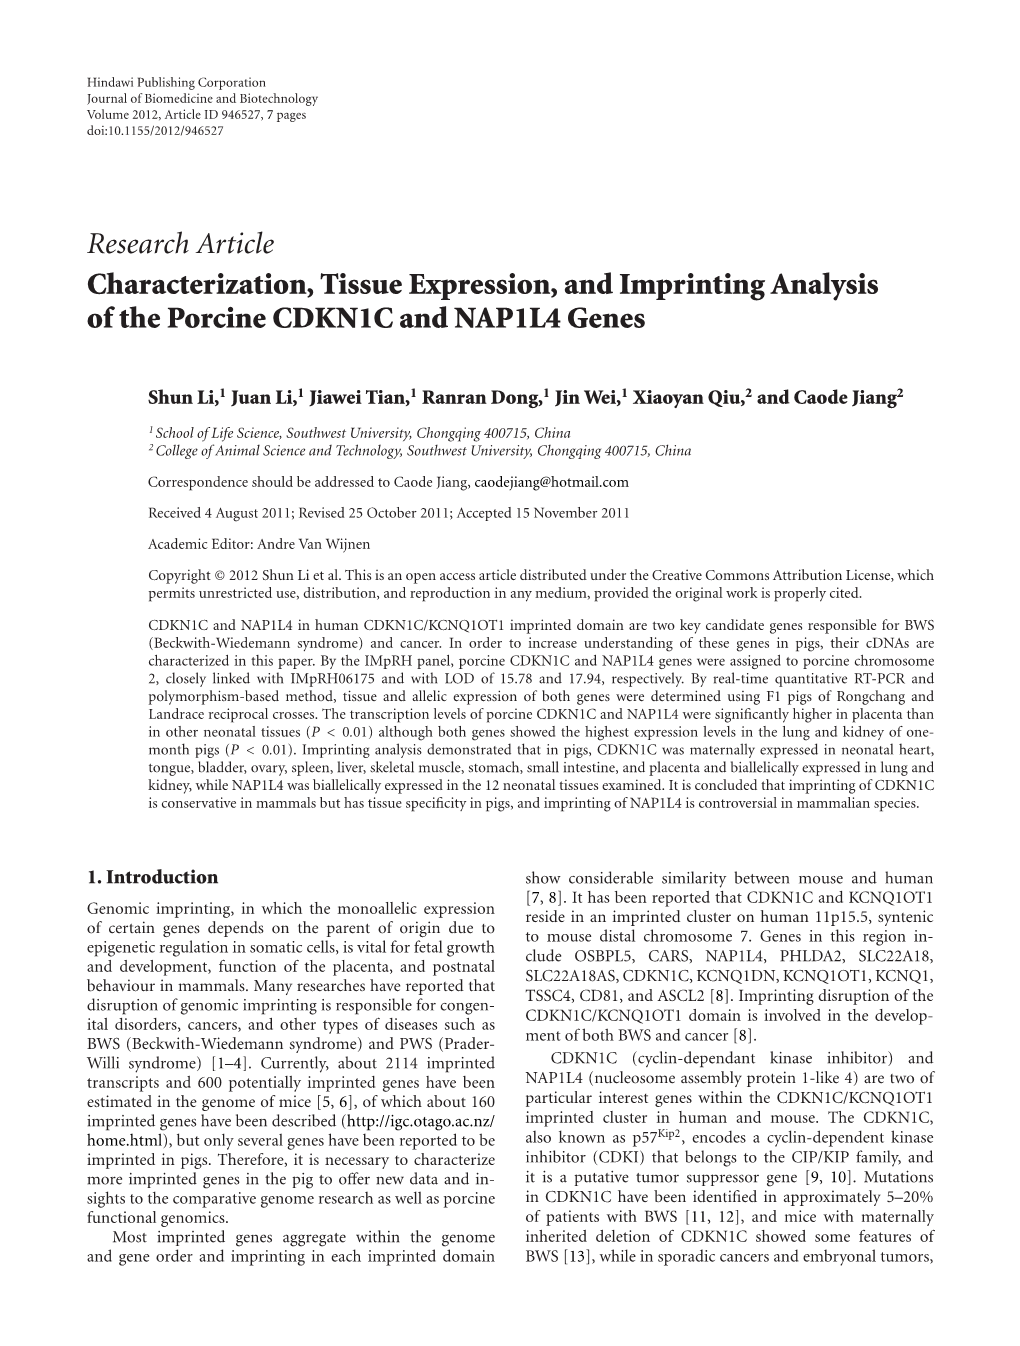 Research Article Characterization, Tissue Expression, and Imprinting Analysis of the Porcine CDKN1C and NAP1L4 Genes